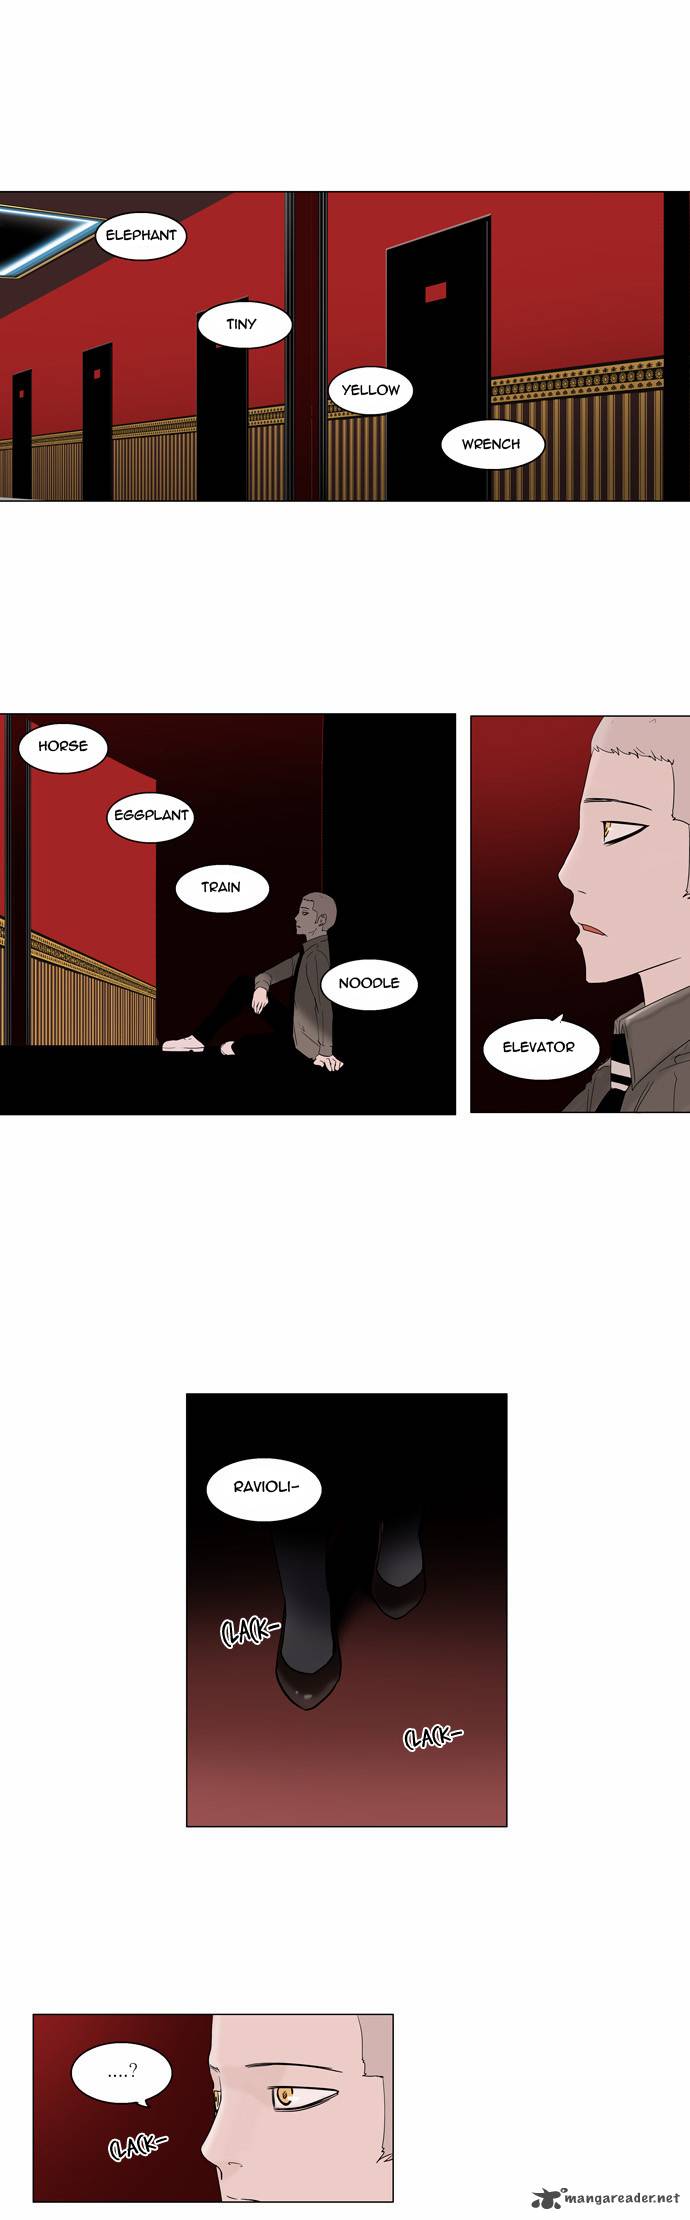 Tower Of God 93 19